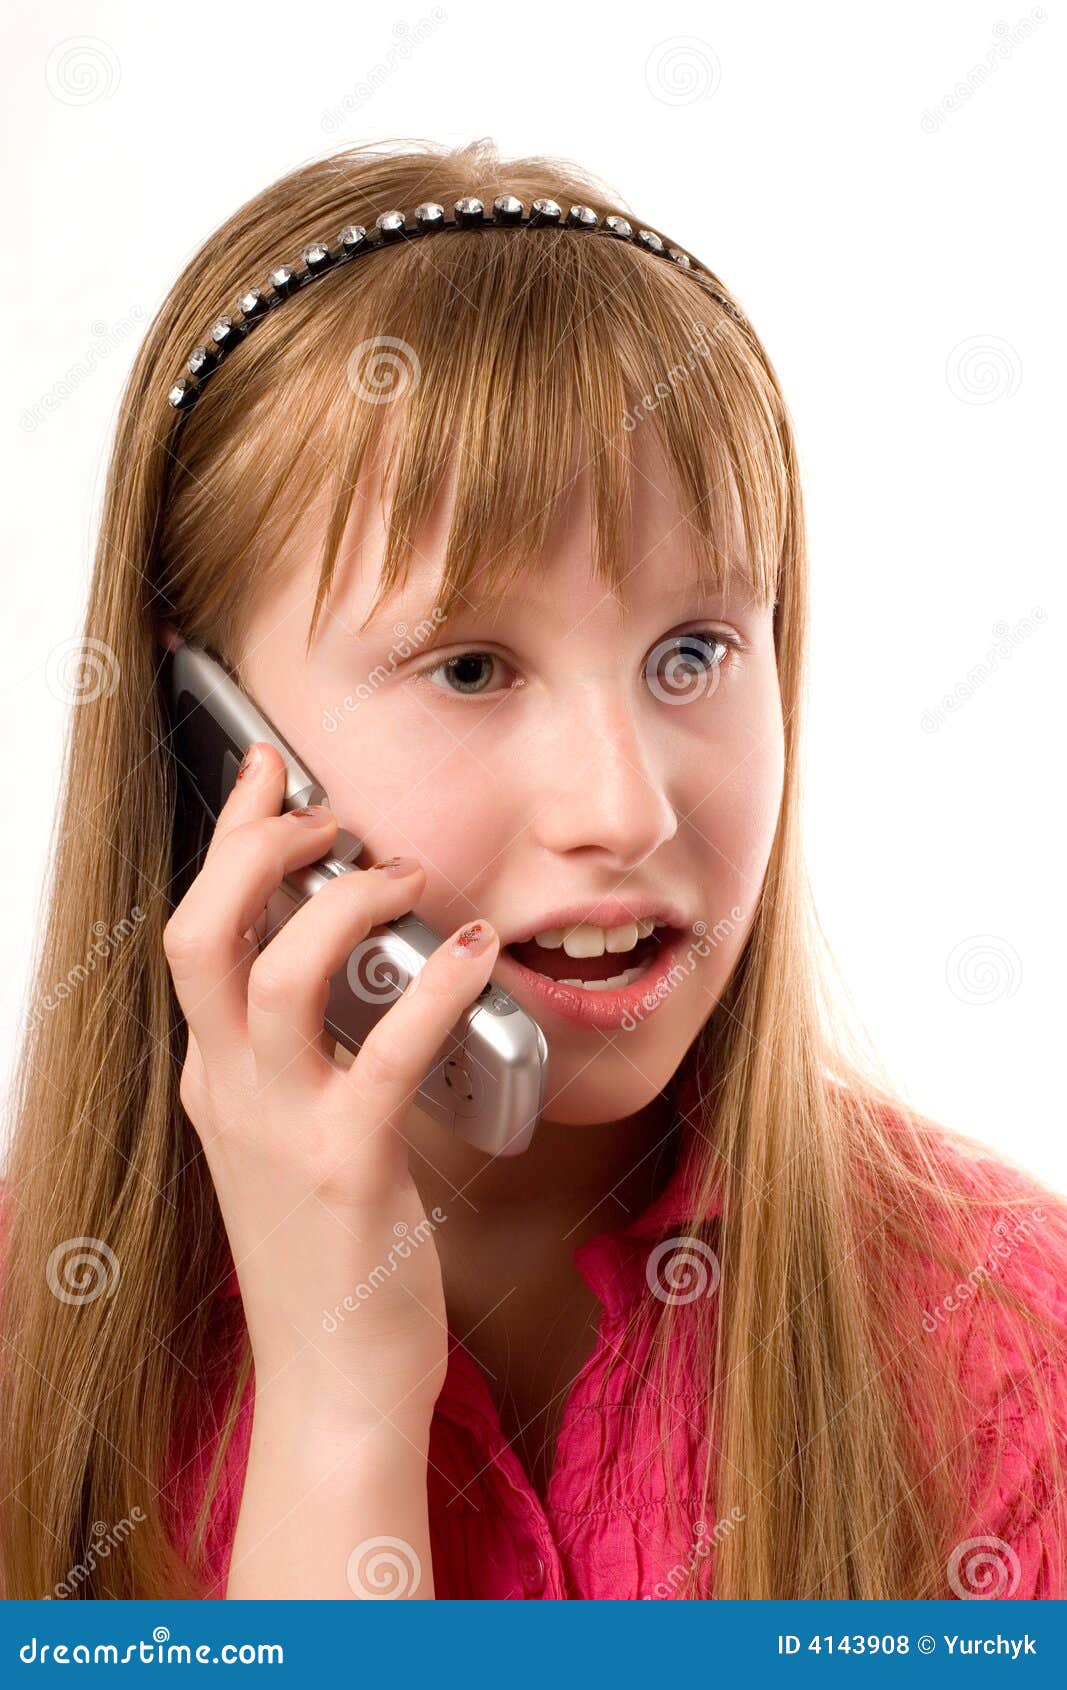 Teenager girl talking by mobile phone isolated on - teenager-girl-talking-mobile-phone-isolated-4143908